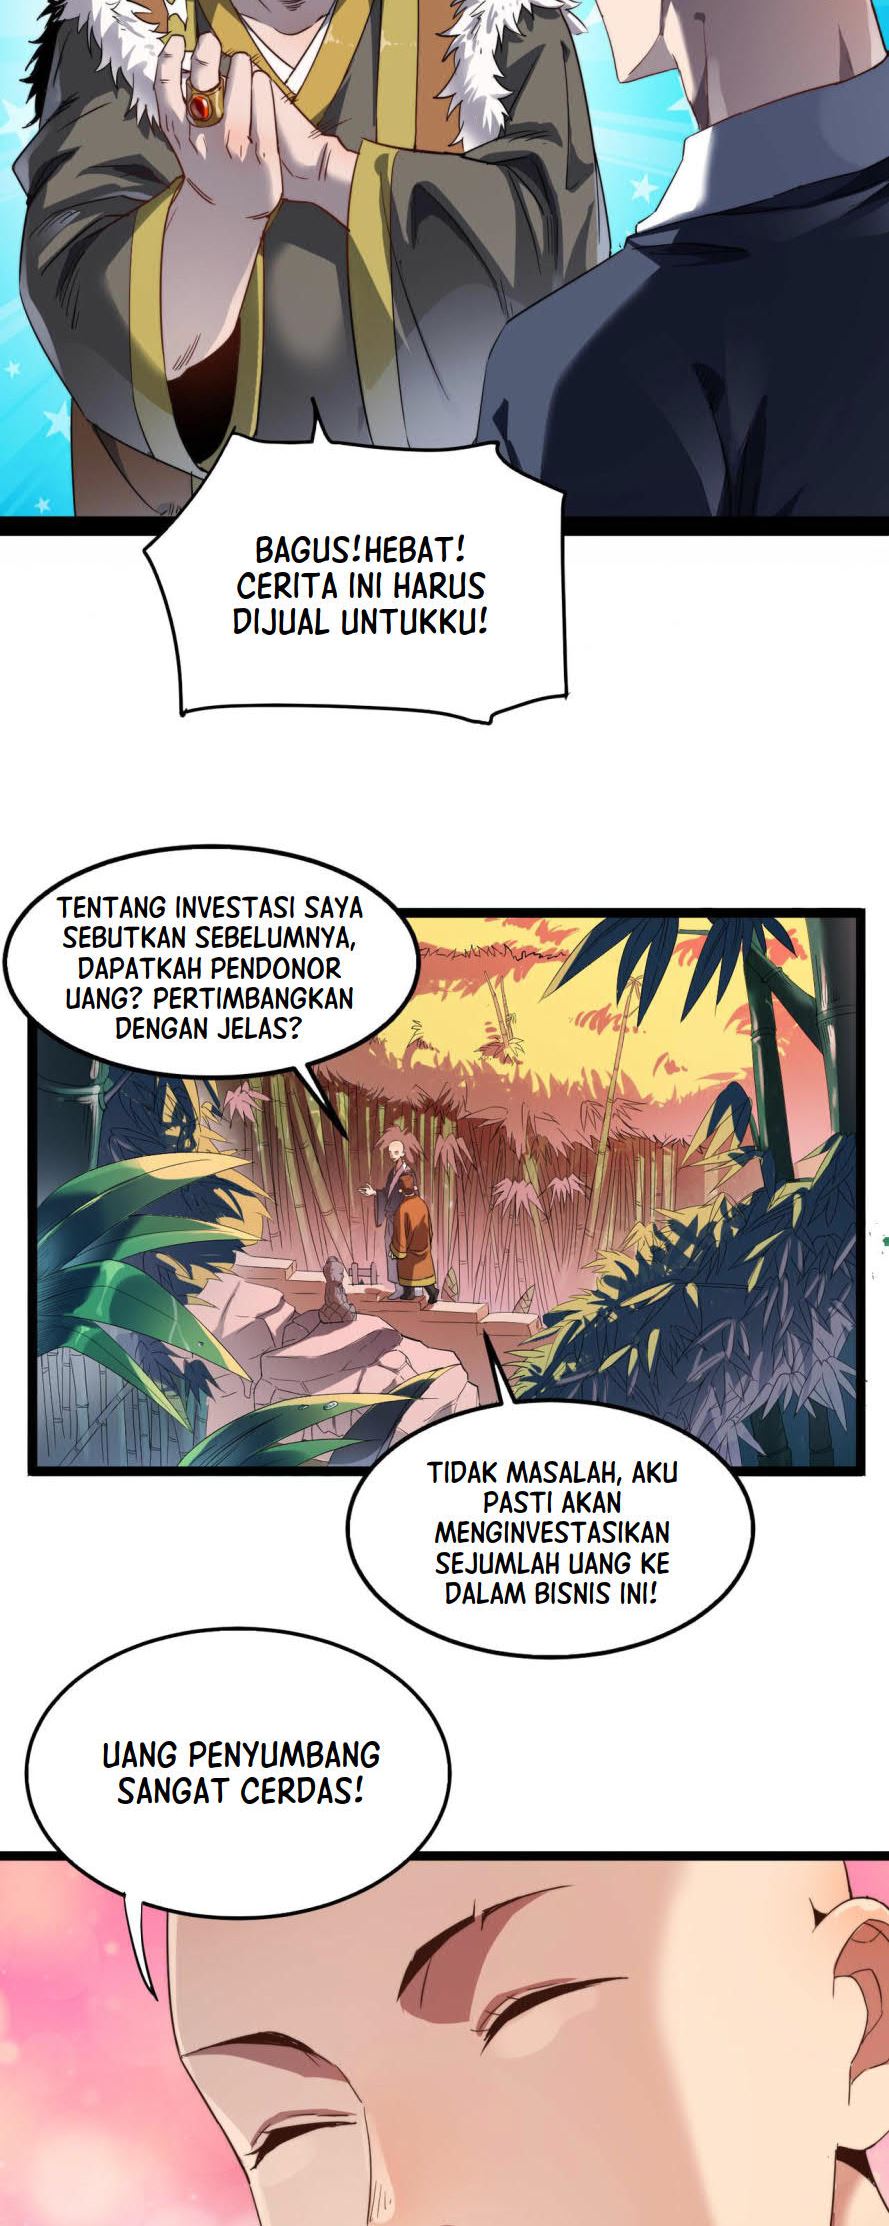 Dilarang COPAS - situs resmi www.mangacanblog.com - Komik building the strongest shaolin temple in another world 007 - chapter 7 8 Indonesia building the strongest shaolin temple in another world 007 - chapter 7 Terbaru 15|Baca Manga Komik Indonesia|Mangacan